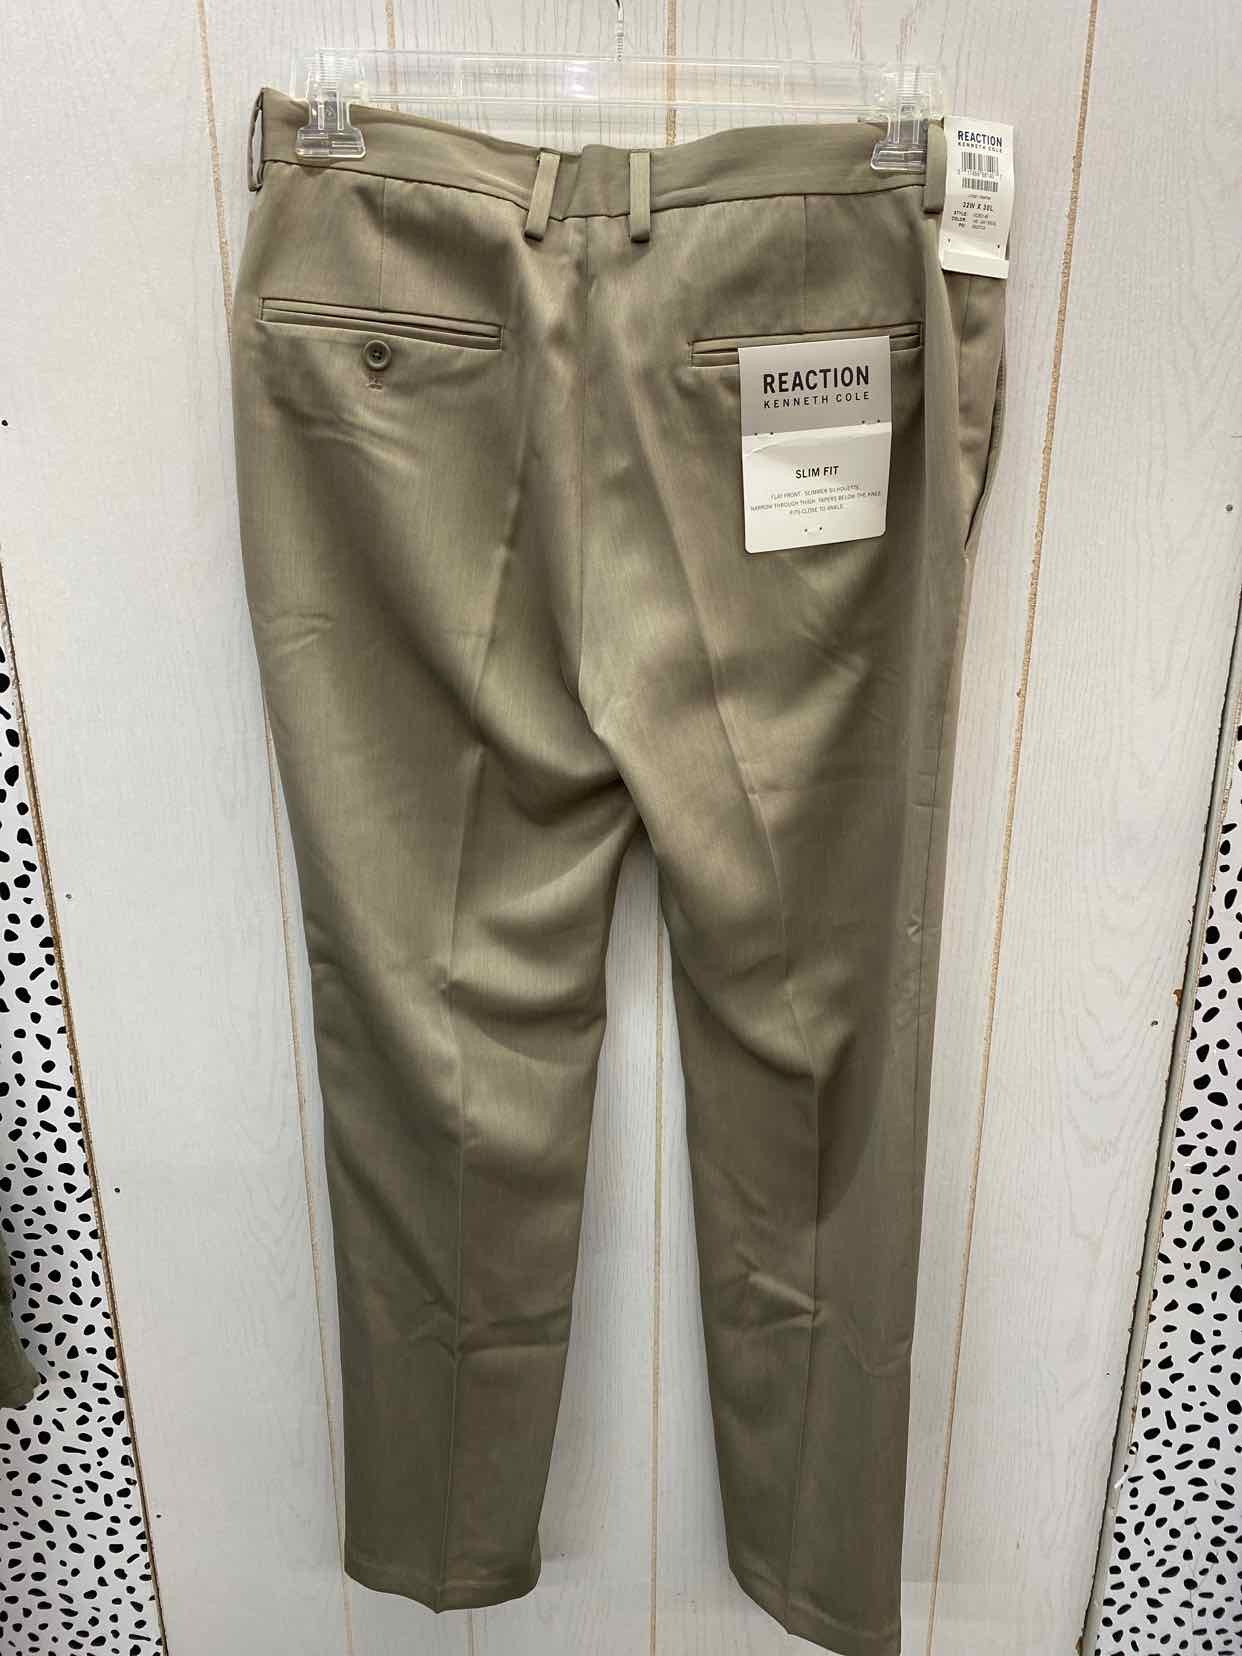 Victorious Men's Basic Casual Slim Fit Stretch Chino Pants DL1250 - Wheat -  32/30 - Walmart.com